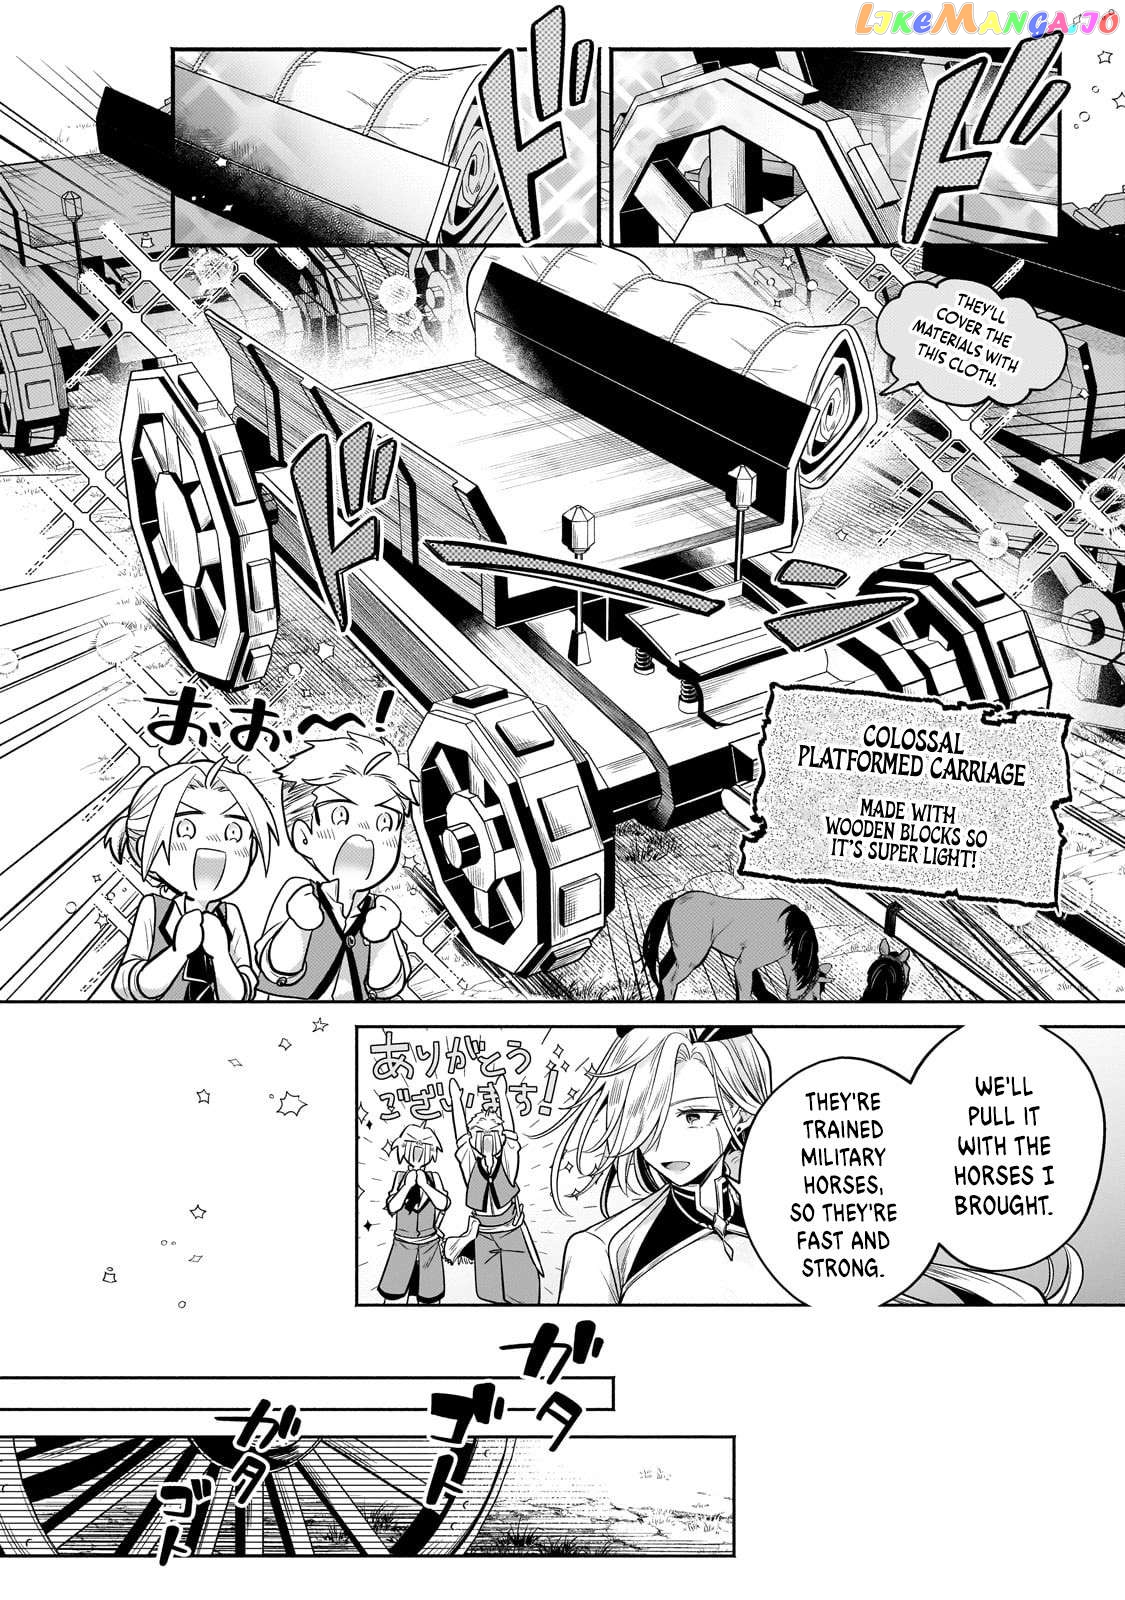 Fun Territory Defense By The Optimistic Lord Chapter 23.2 - page 7